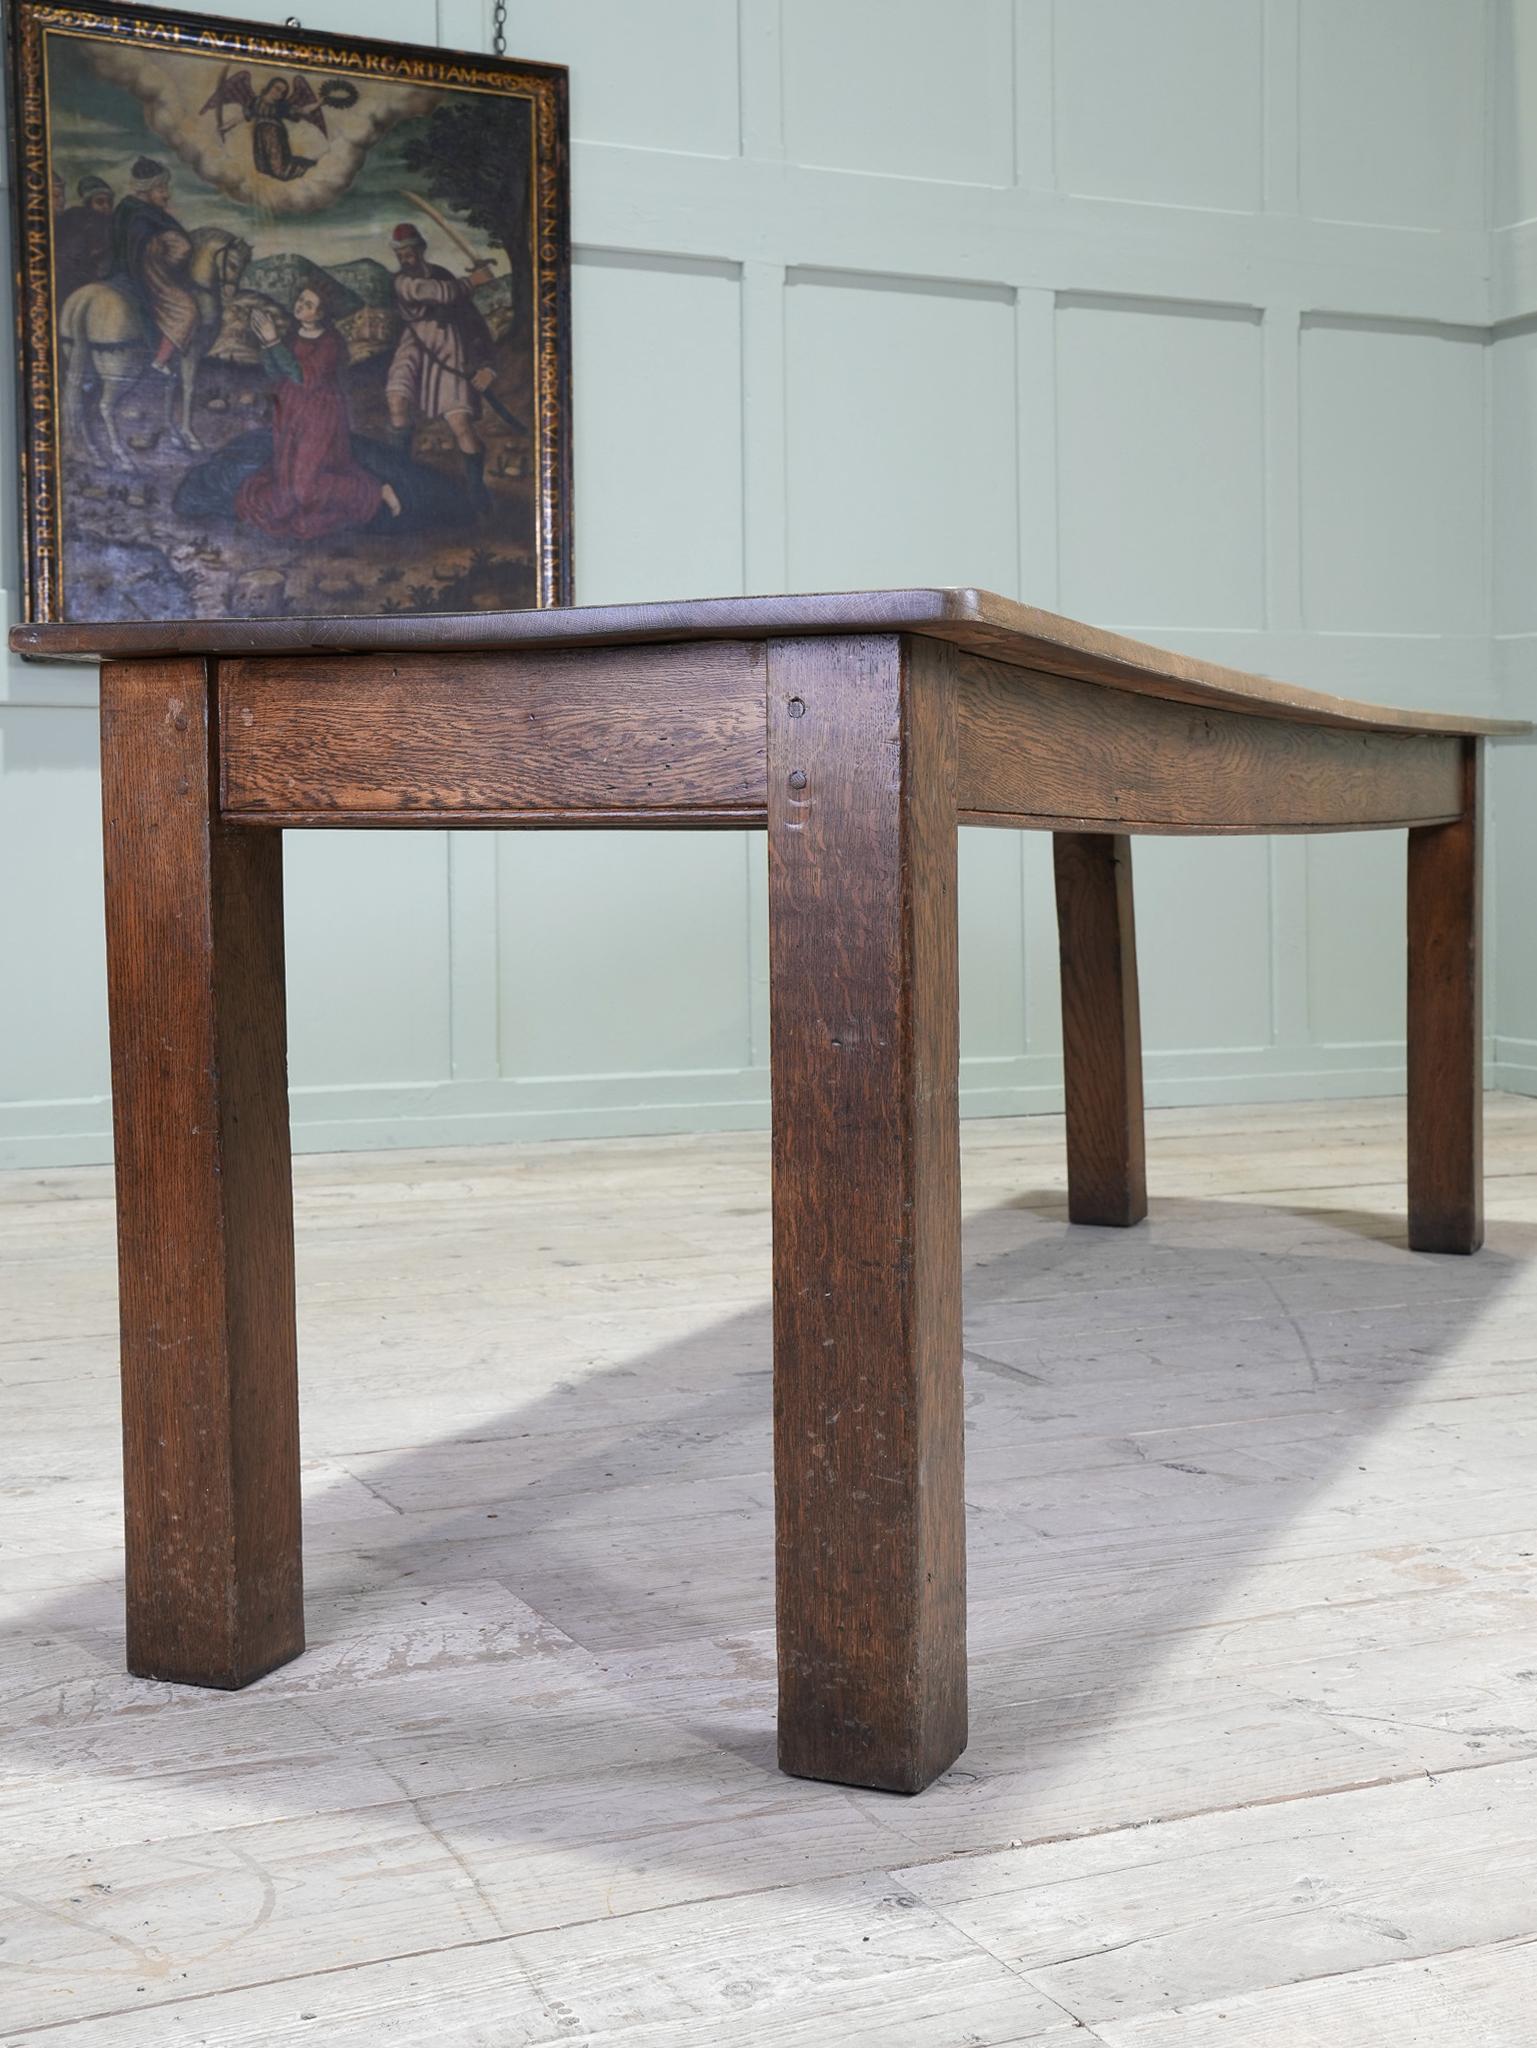 A substantial square rigged oak refectory table.

Untouched original order.

Provenance : Rydal Penrhos School, North Wales